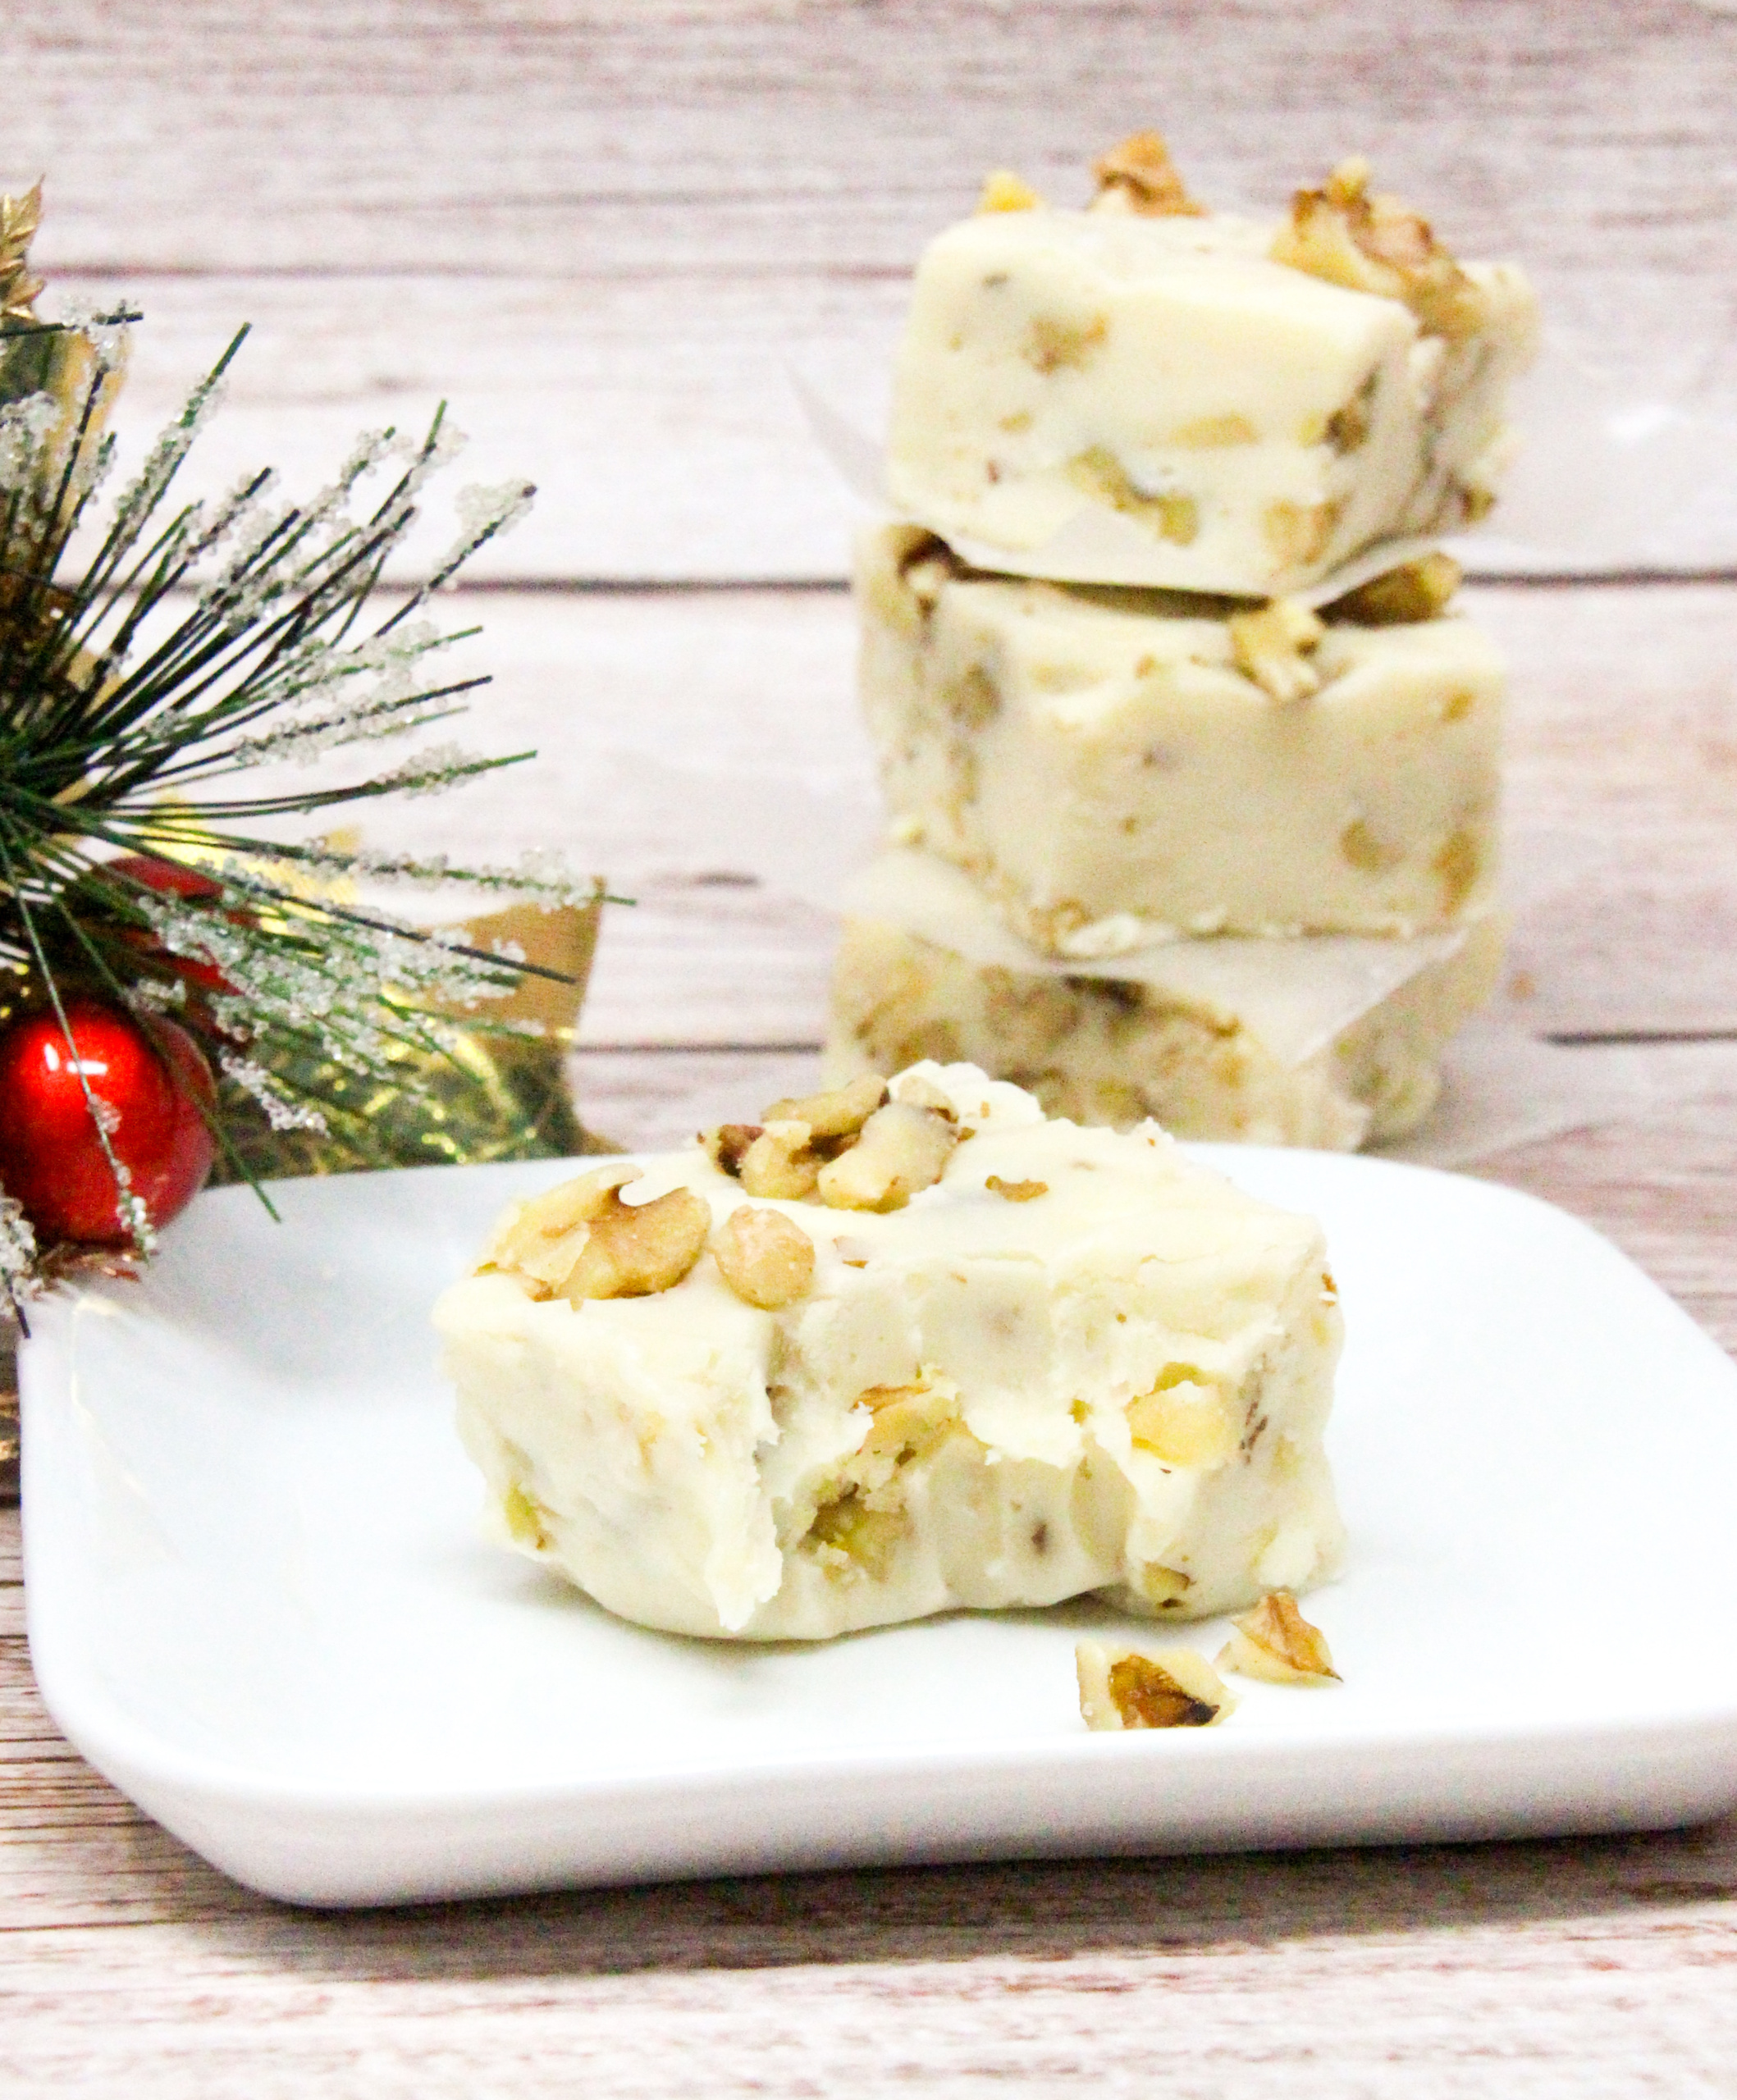 Using only six staple ingredients, and using the microwave to melt the white chocolate, Easy Maple Fudge comes together in a snap, making it a great addition to Christmas goodie platters or as a yummy gift to family and friends. Recipe shared with permission granted by Nancy Coco, author of HAVING A FUDGY CHRISTMAS TIME. 